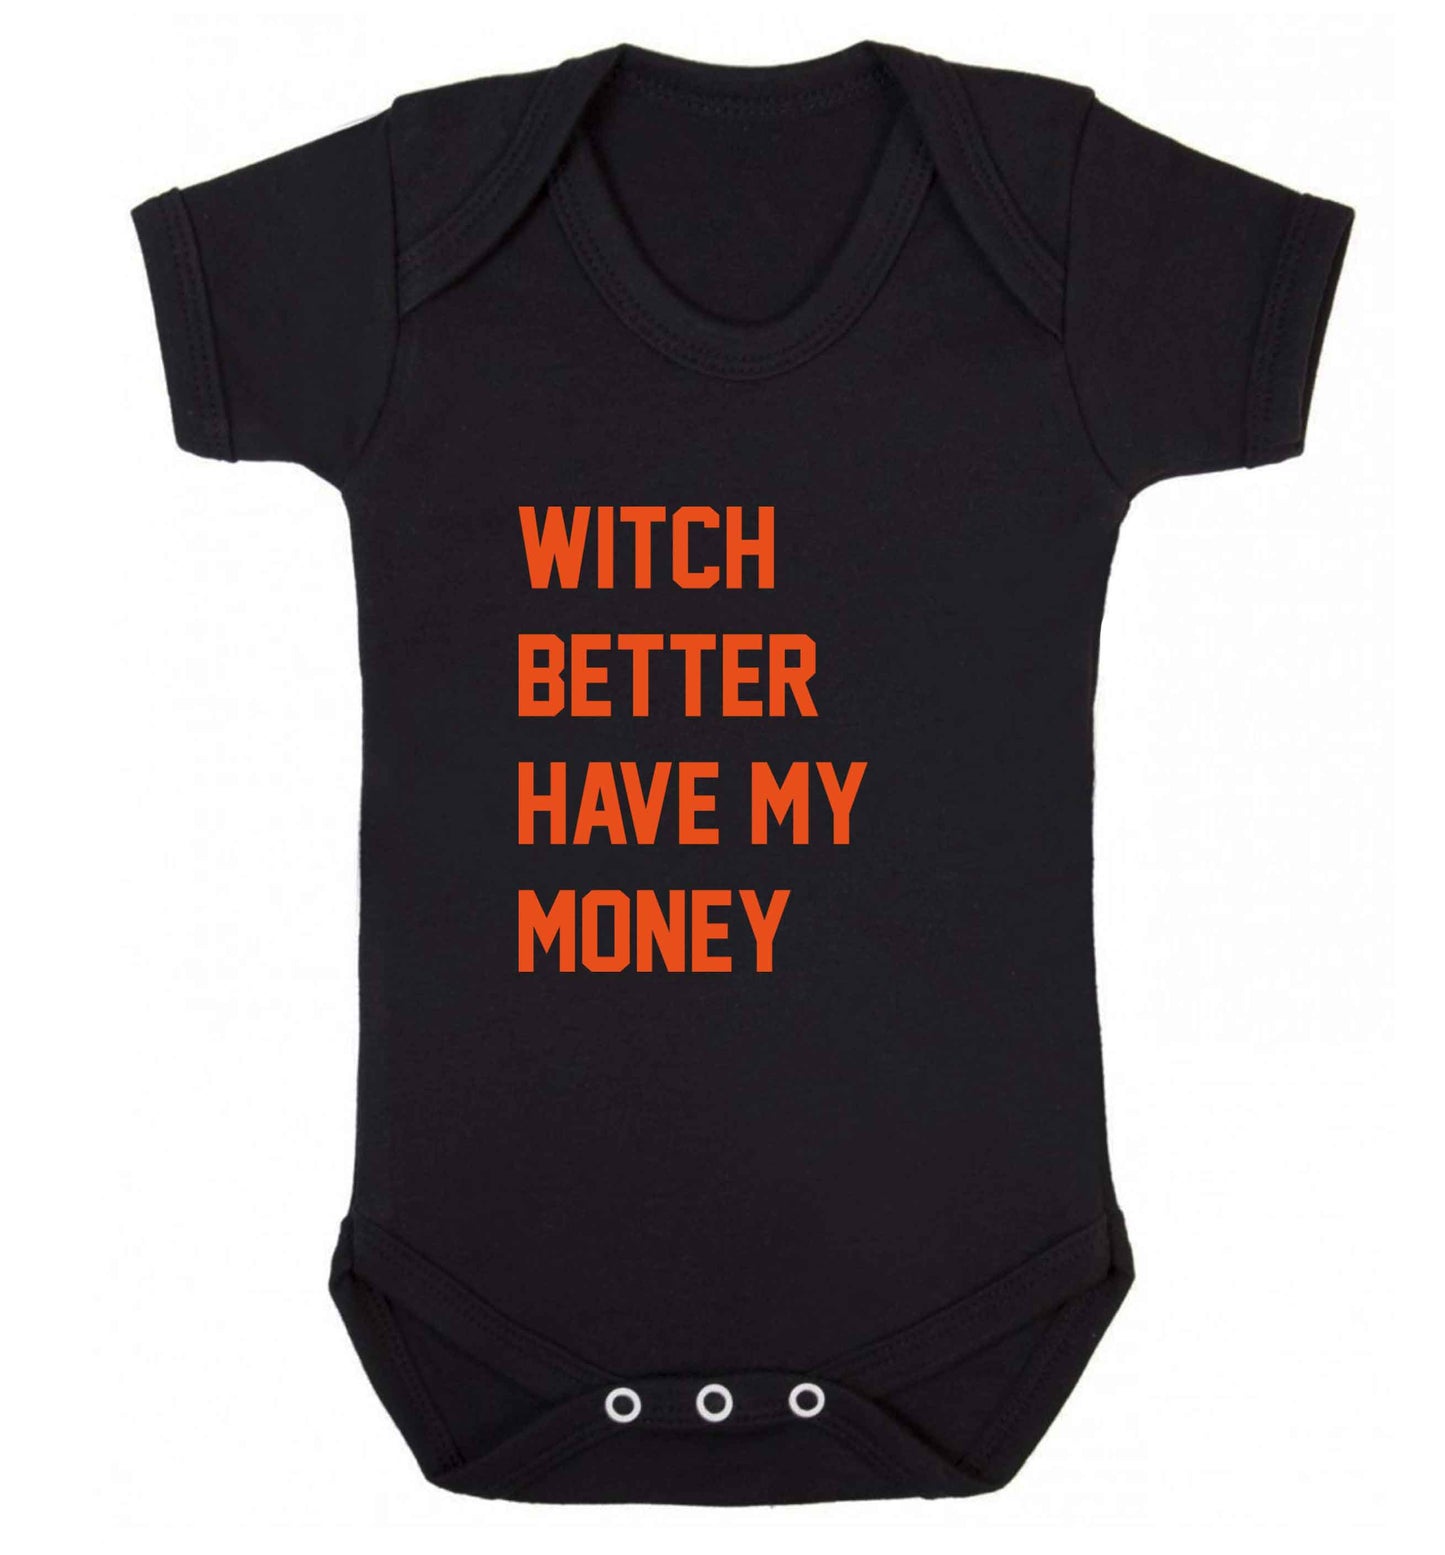 Witch better have my money baby vest black 18-24 months